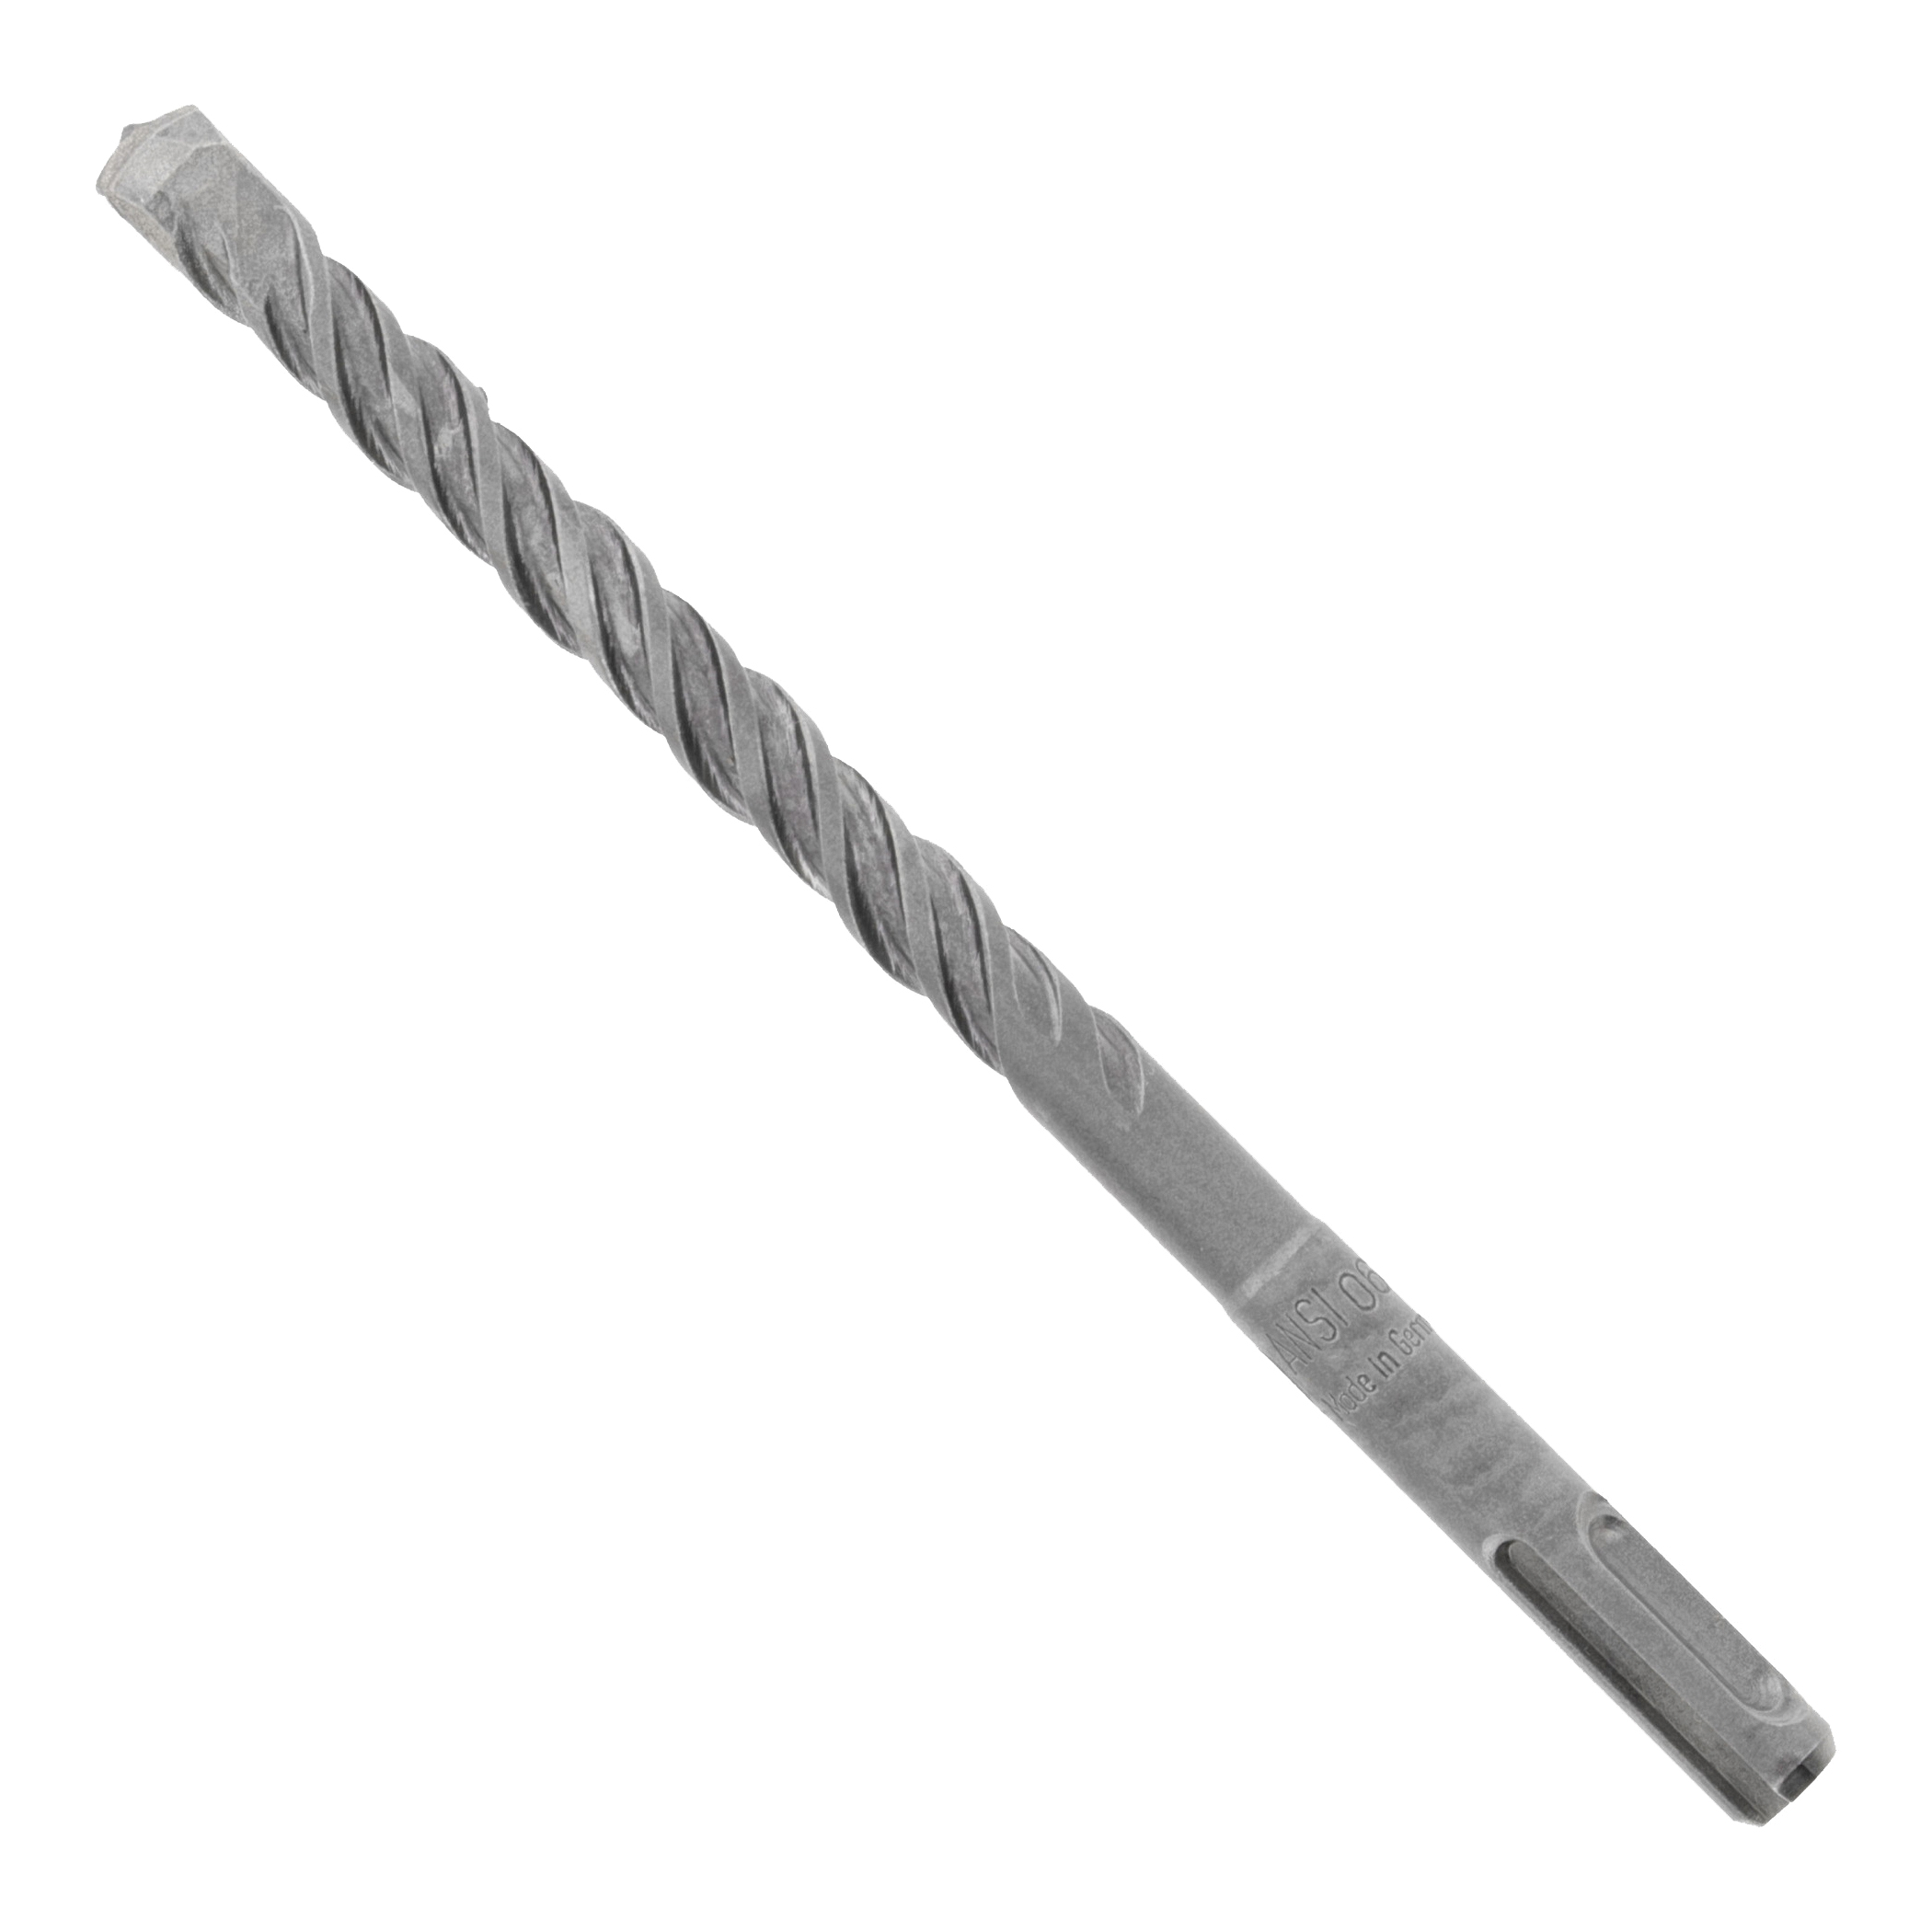 DMAPL2220-P25 Hammer Drill Bit, 3/8 in Dia, 6 in OAL, Percussion, 4-Flute, SDS Plus Shank